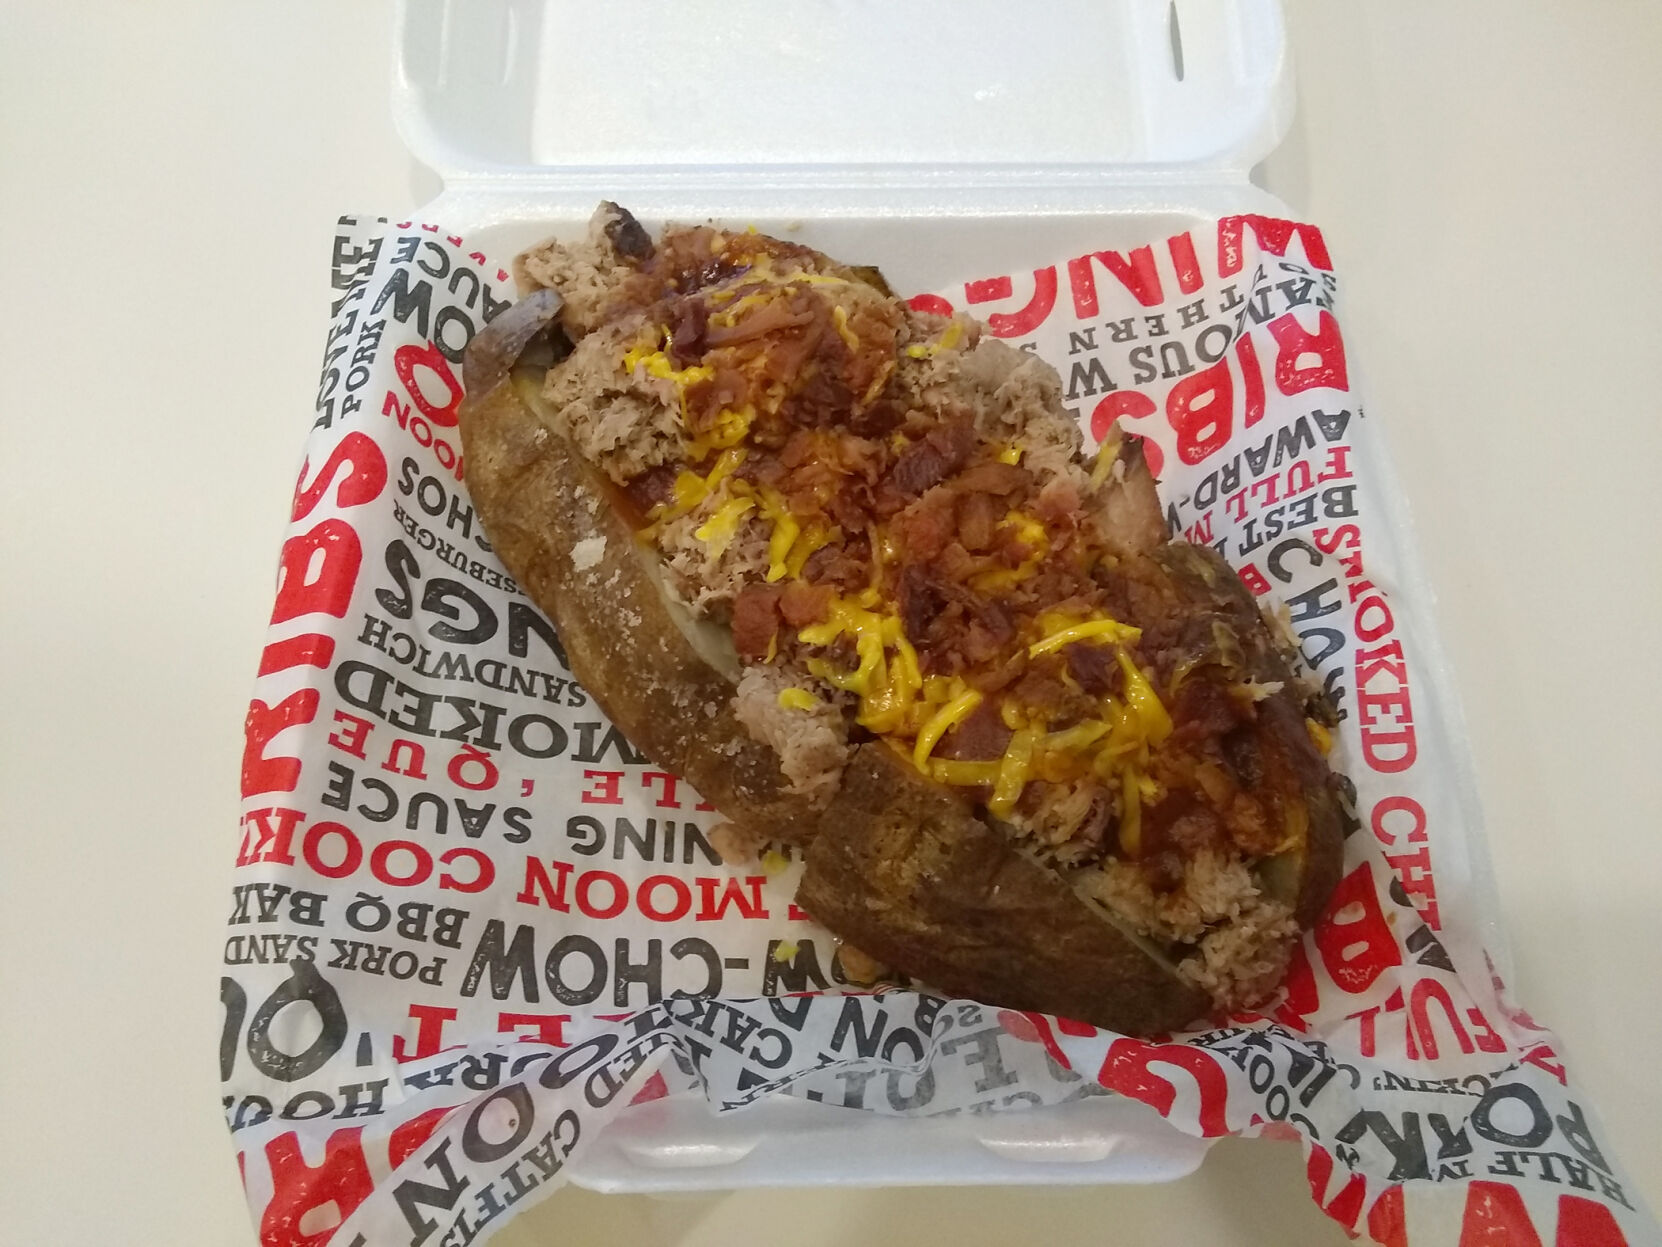 Baked potato is a must-have at Full Moon